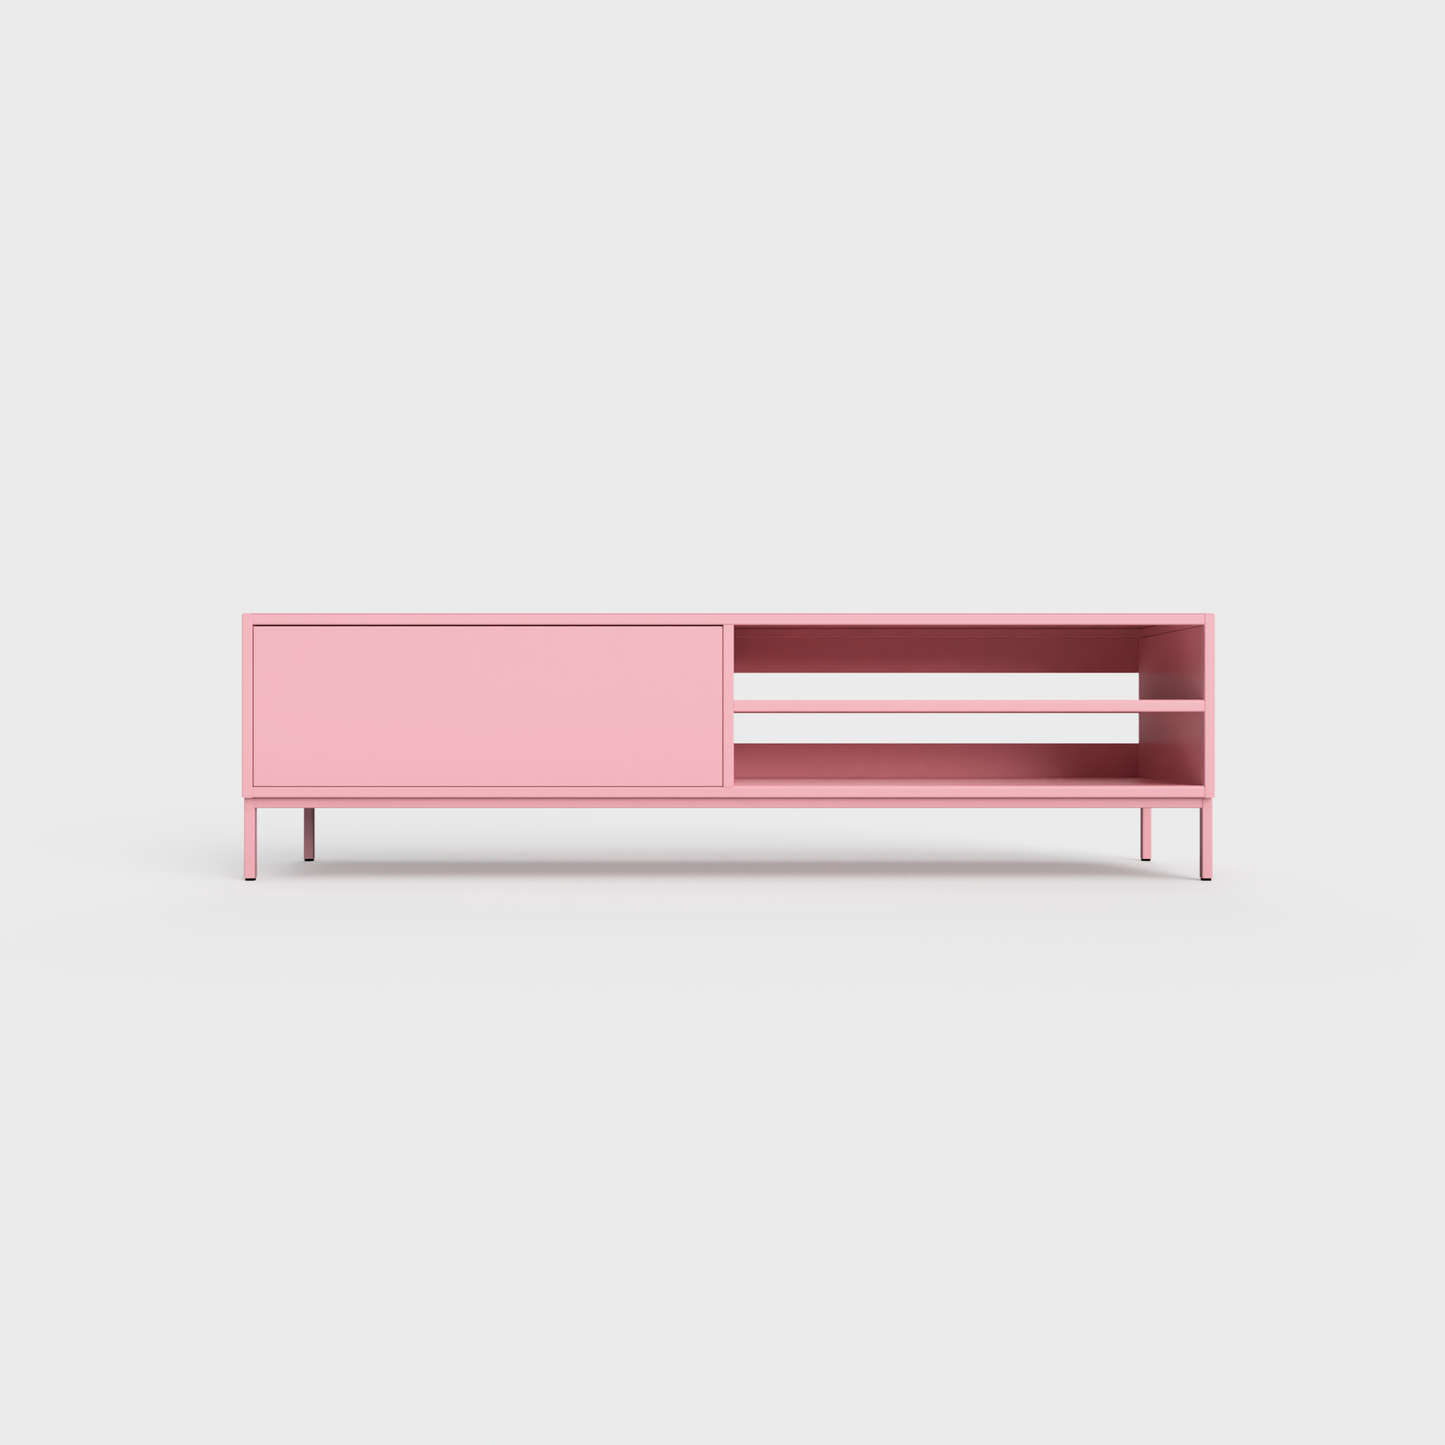 Prunus 02 Lowboard in Lily color, powder-coated steel, elegant and modern piece of furniture for your living room